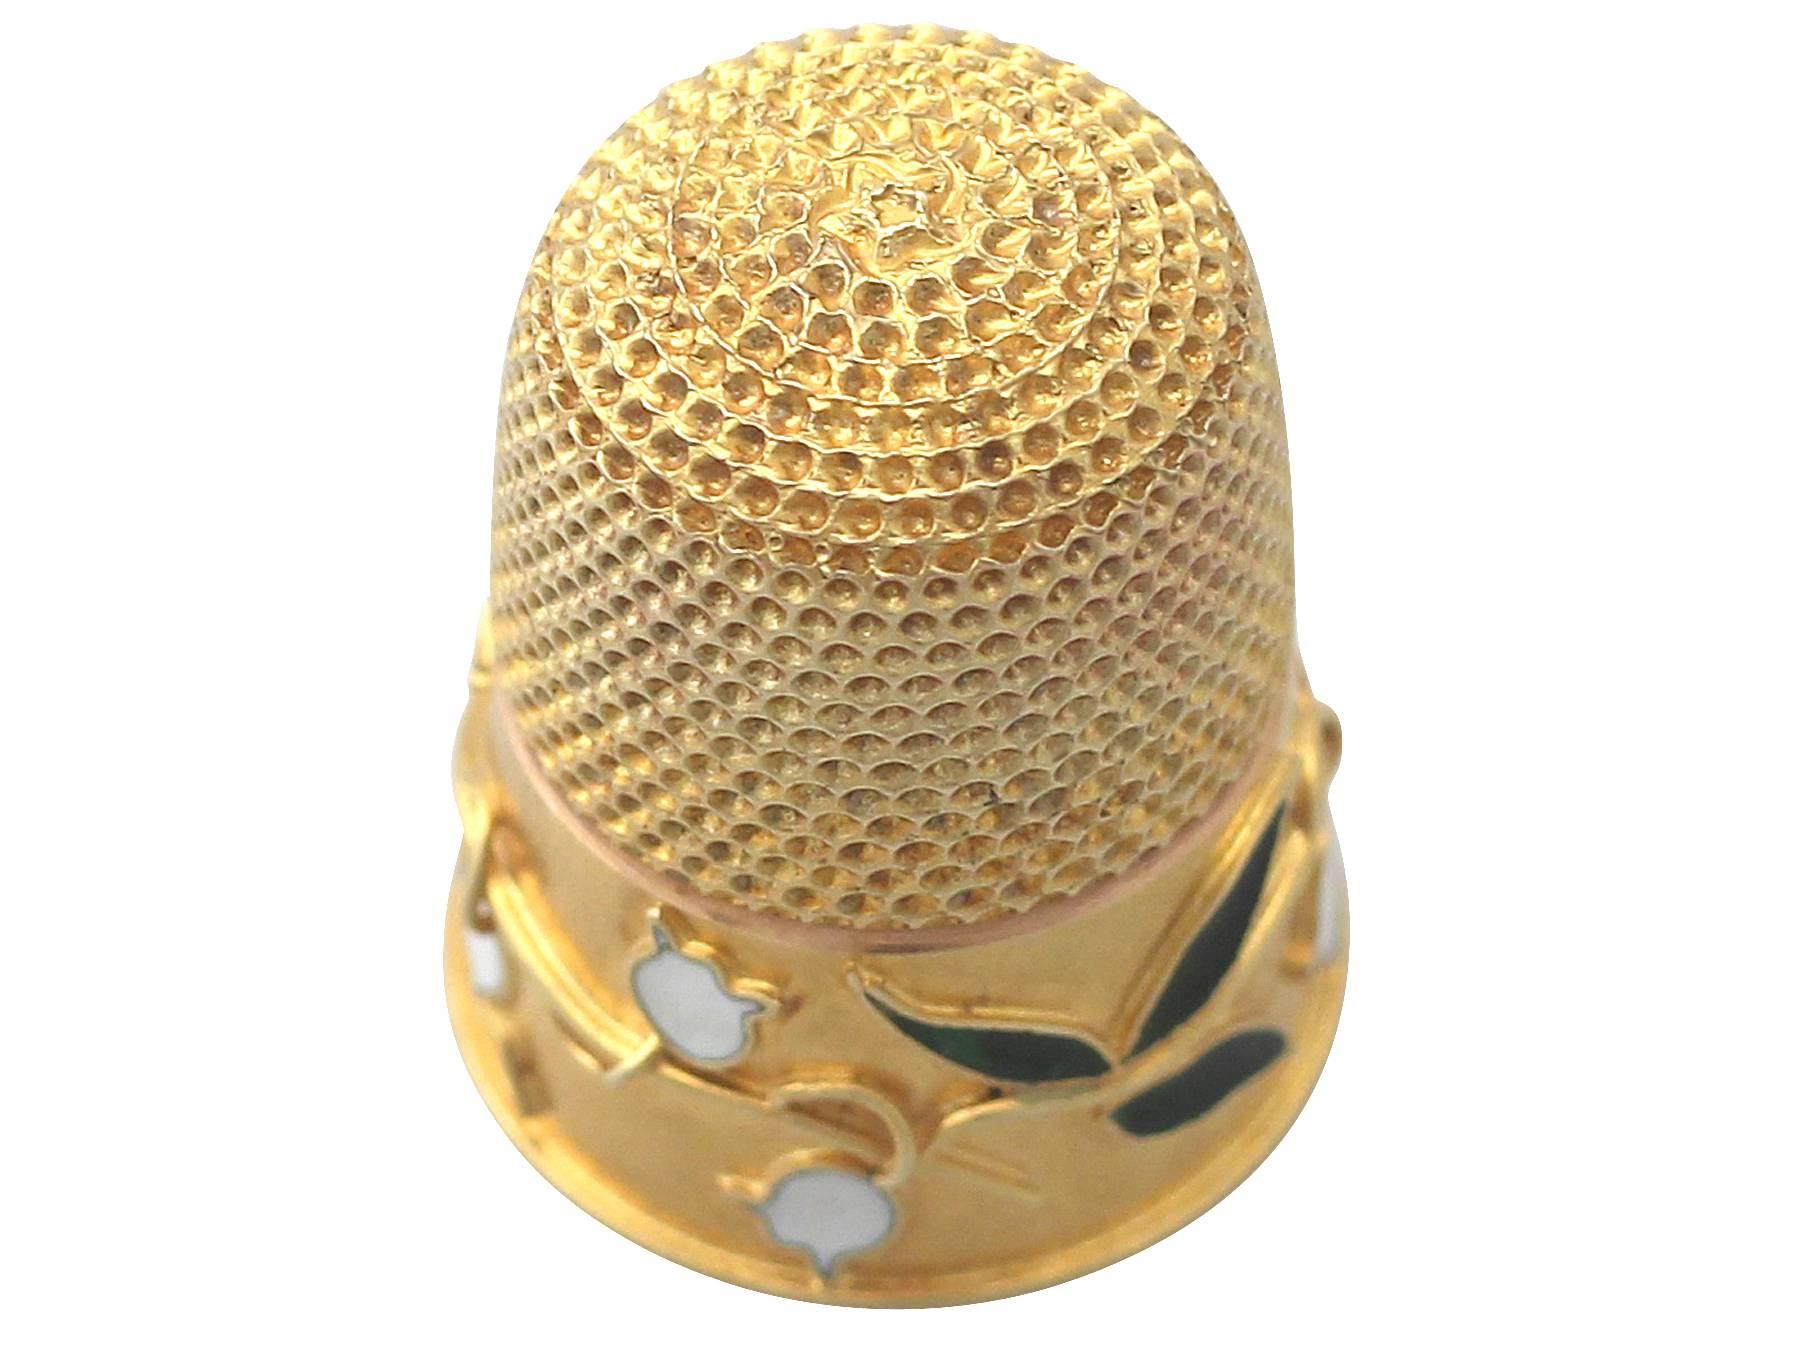 A fine and impressive antique Victorian 14 karat yellow gold thimble with enamel decoration; an addition to our diverse range of collectable antiques

This fine and impressive antique thimble has been crafted in 14k yellow gold.

The thimble has a